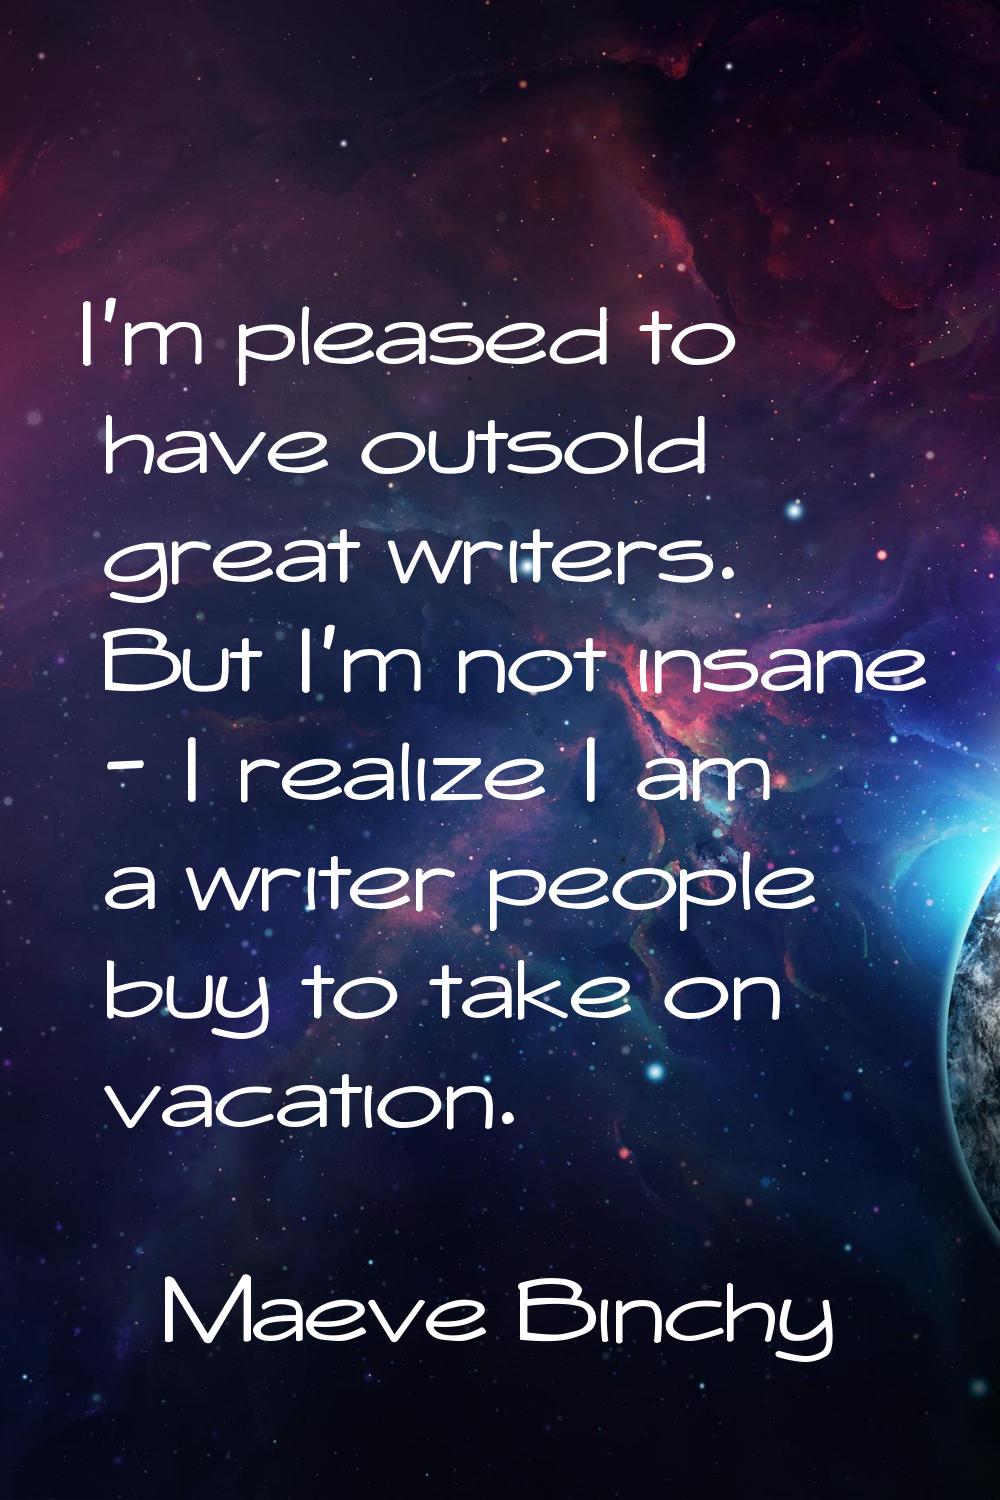 I'm pleased to have outsold great writers. But I'm not insane - I realize I am a writer people buy 